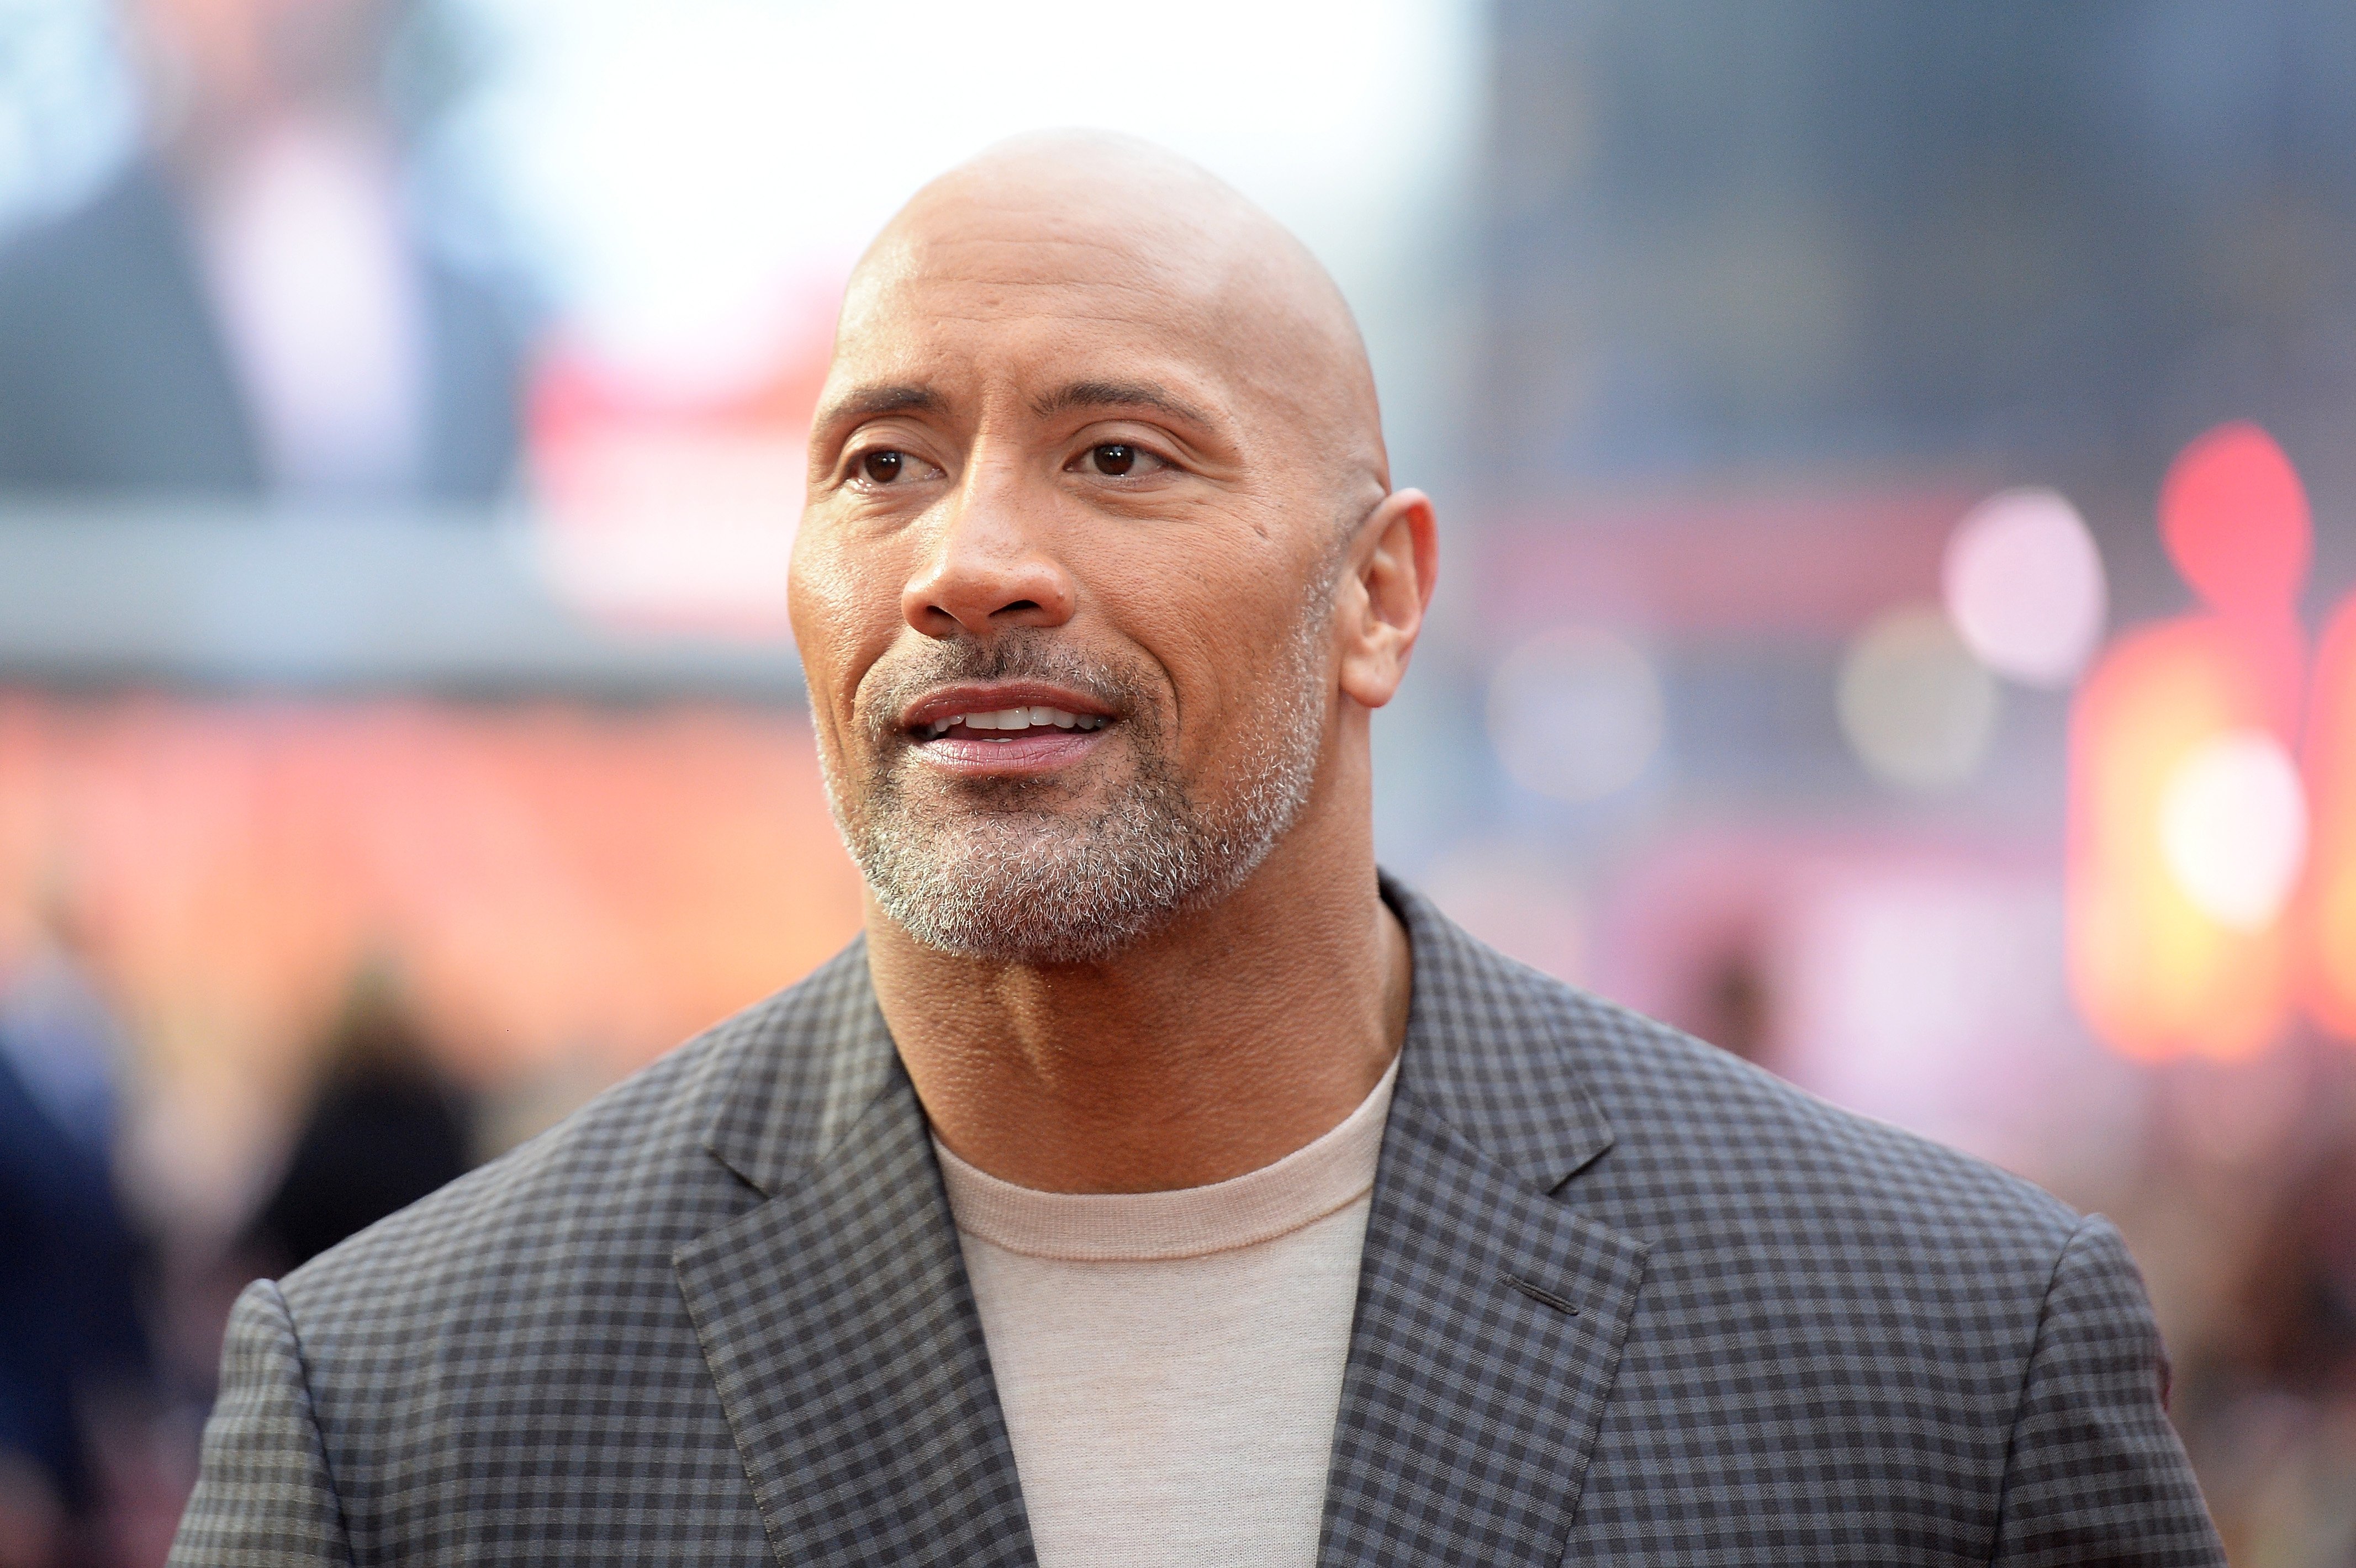 Dwayne Johnson attends the European Premiere of 'Rampage' at Cineworld Leicester Square on April 11, 2018 in London, England | Photo: Getty Images